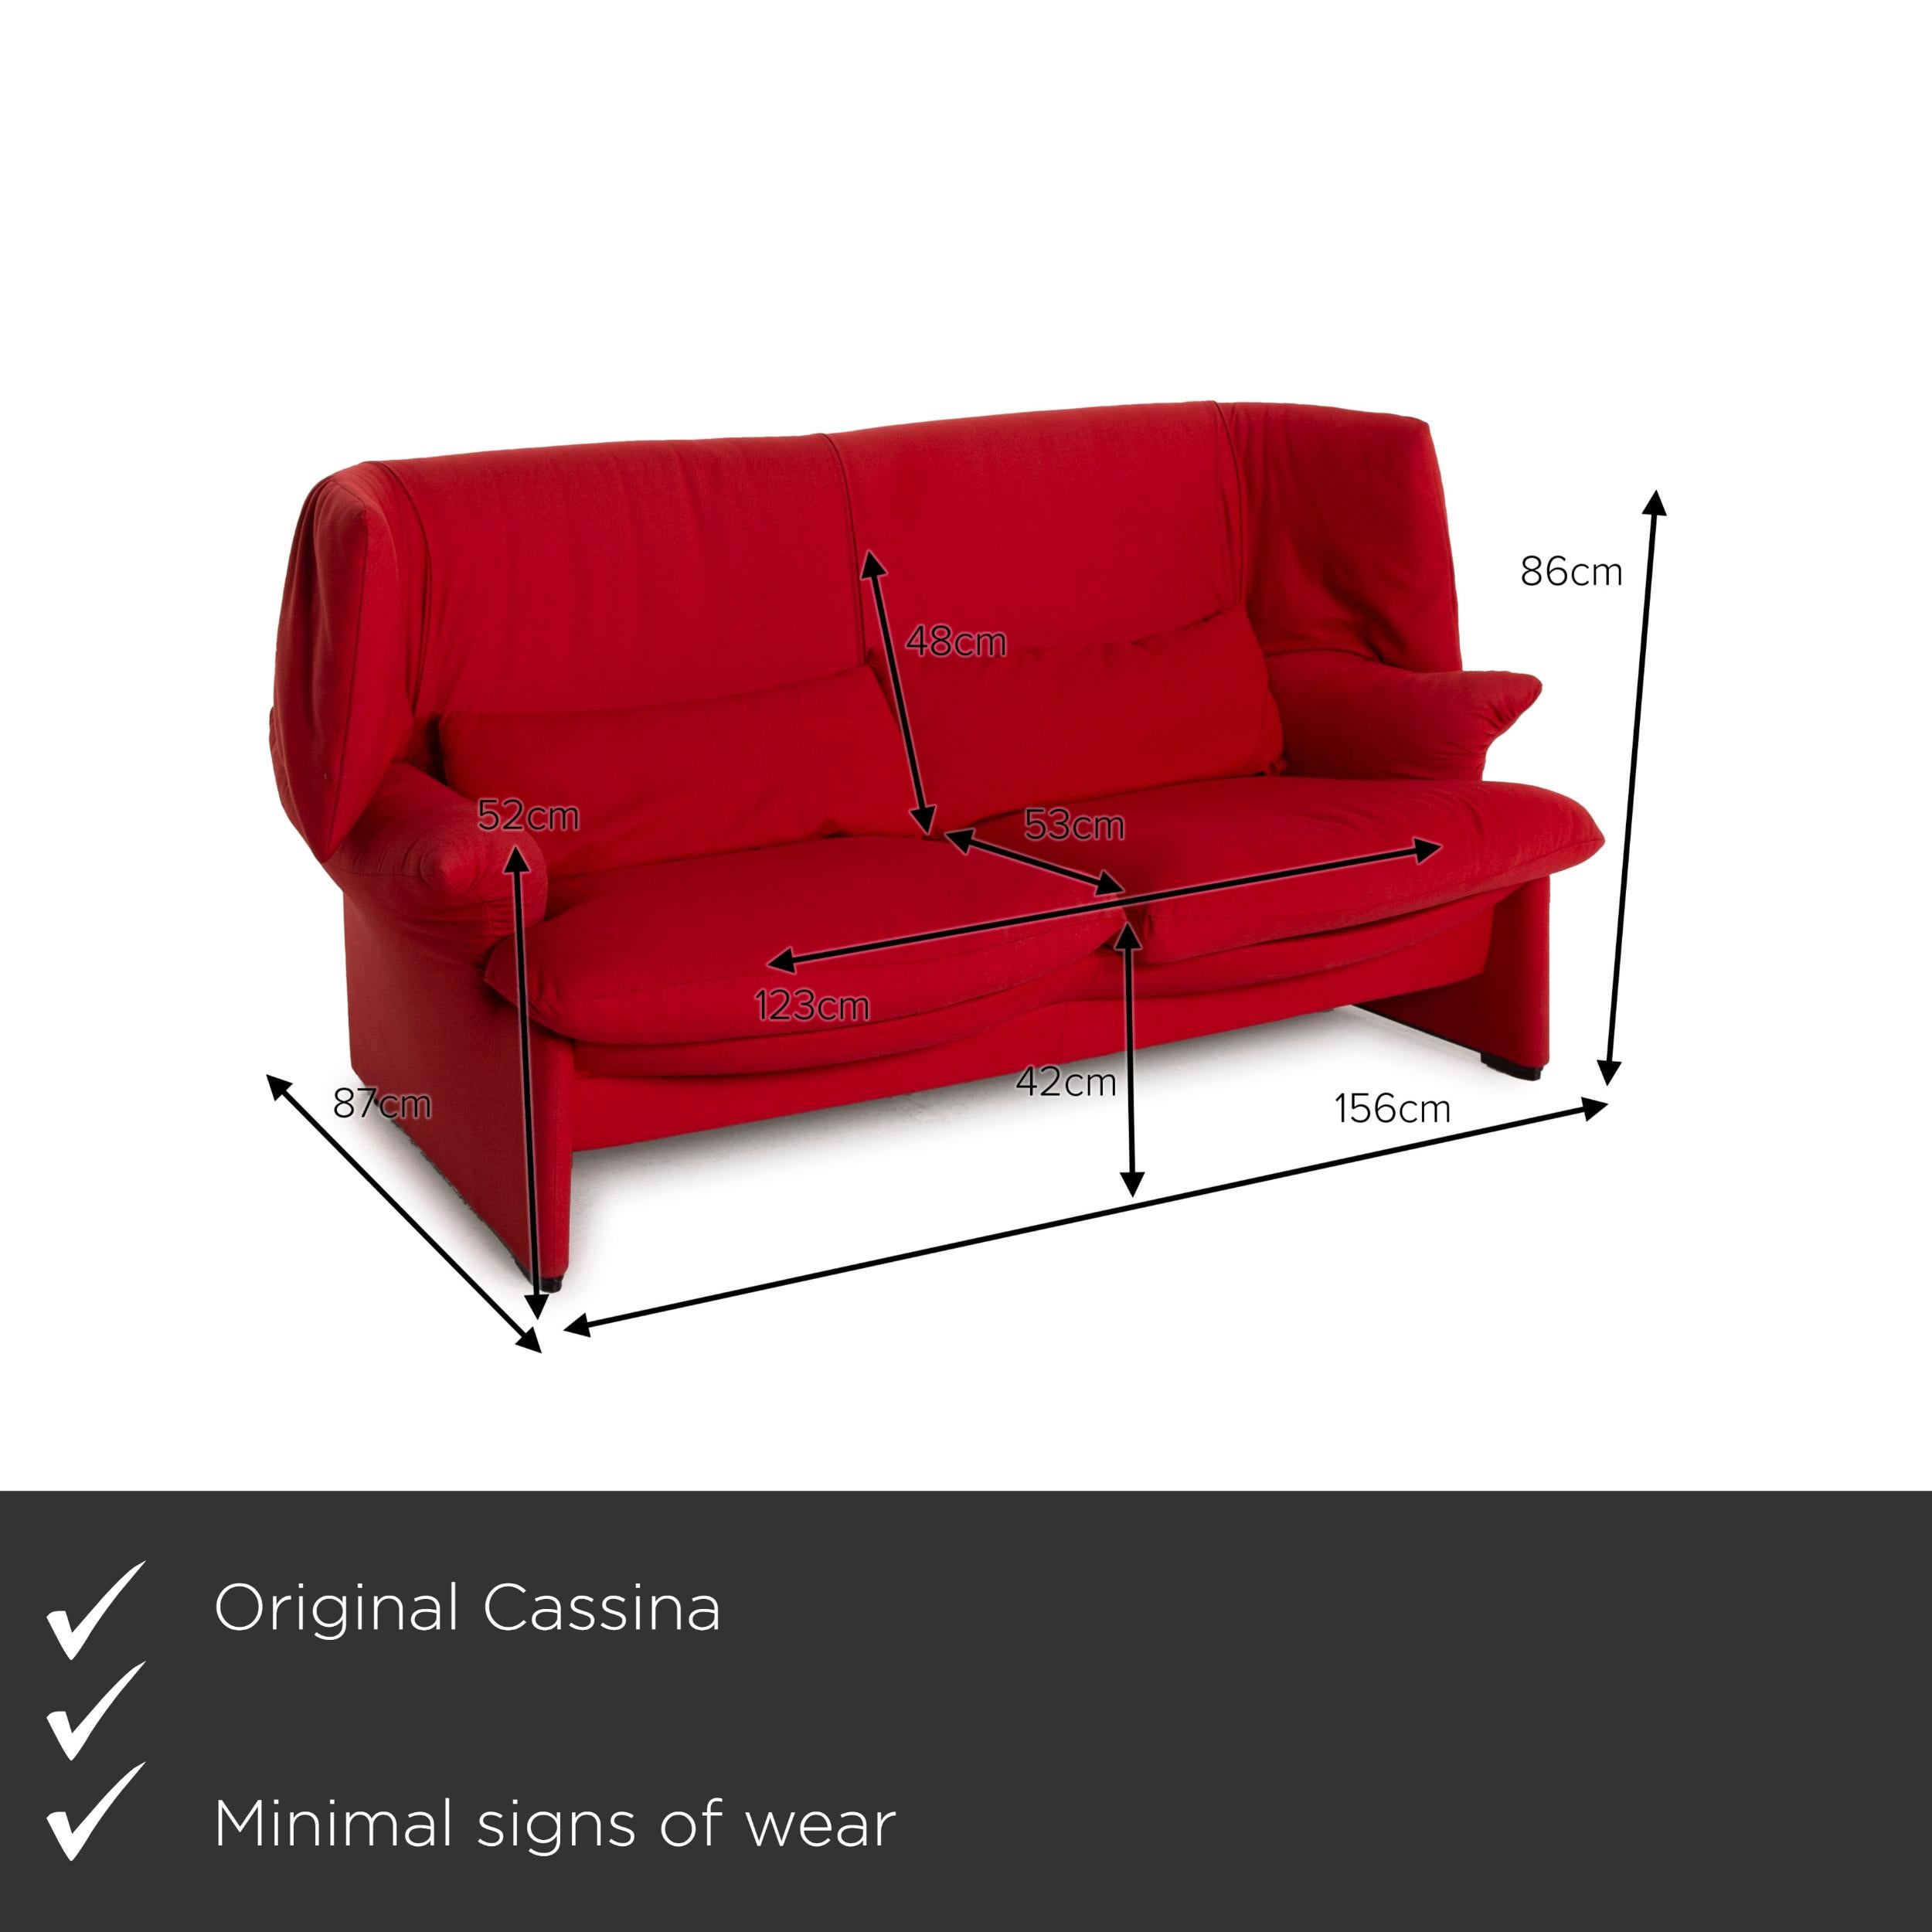 We present to you a Cassina Maralunga fabric sofa red two-seater.


 Product measurements in centimeters:
 

Depth: 87
Width: 165
Height: 86
Seat height: 42
Rest height: 52
Seat depth: 53
Seat width: 123
Back height: 48.
 